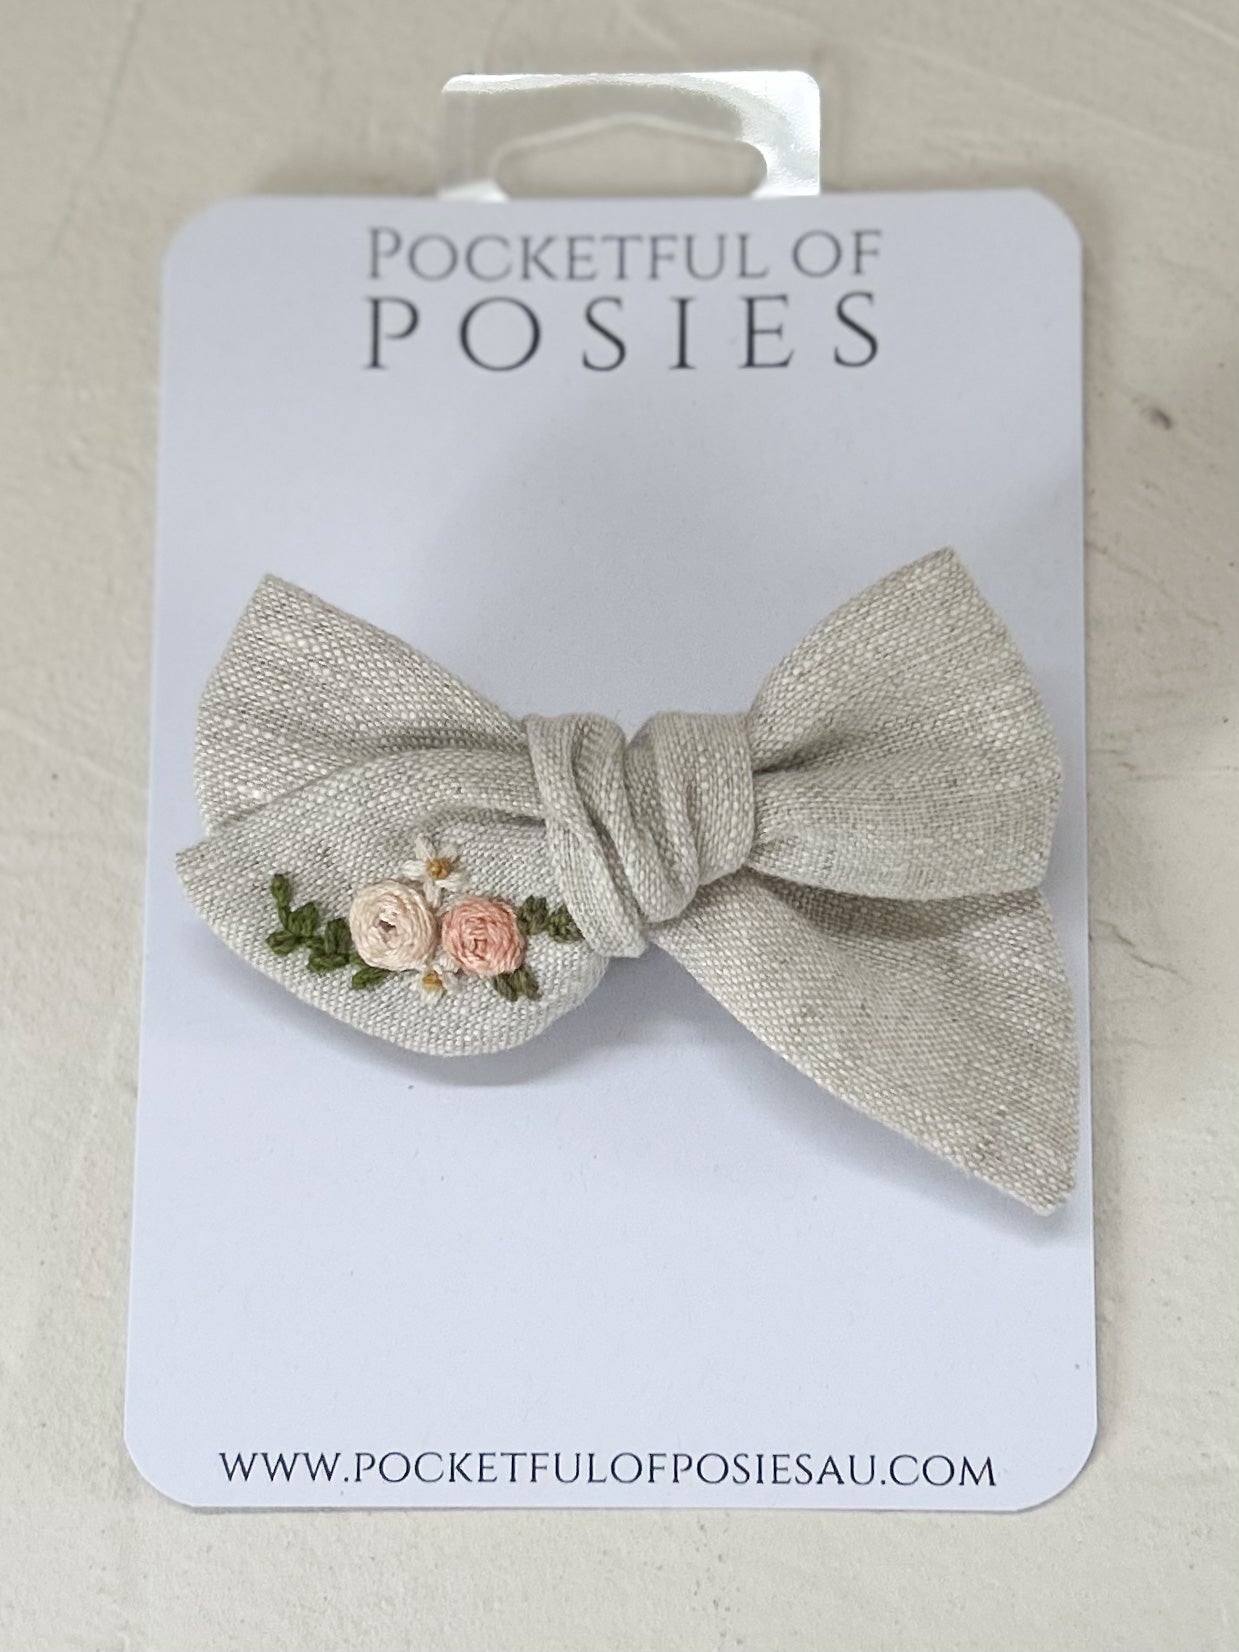 Stone Linen Evie Bow with Blush Pink roses and daisies